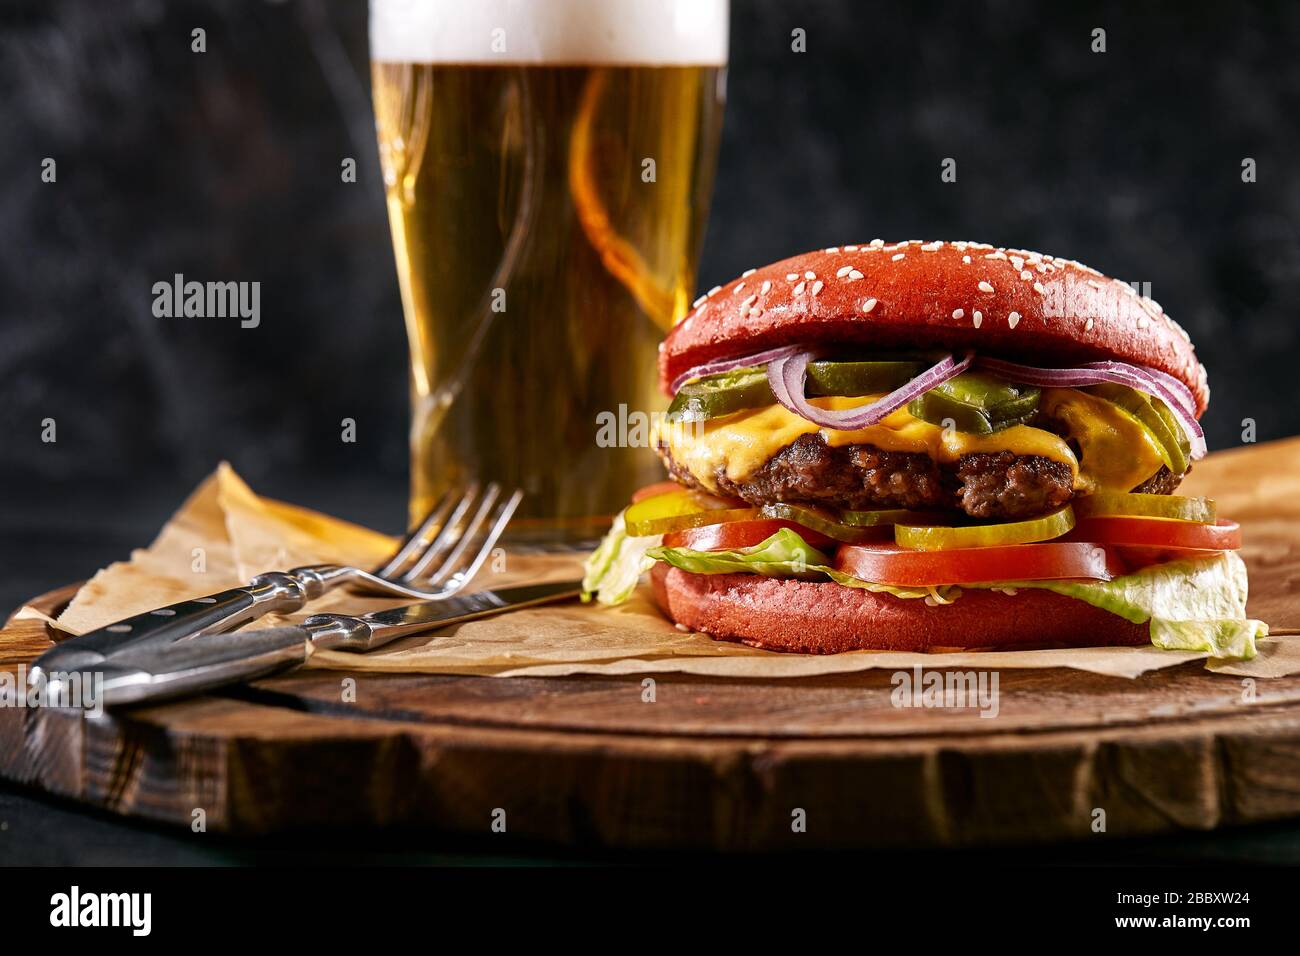 Juicy burger, french fries, sauces and a glass of cold beer on a dark wooden background. copy space, fast food set, food photo Stock Photo